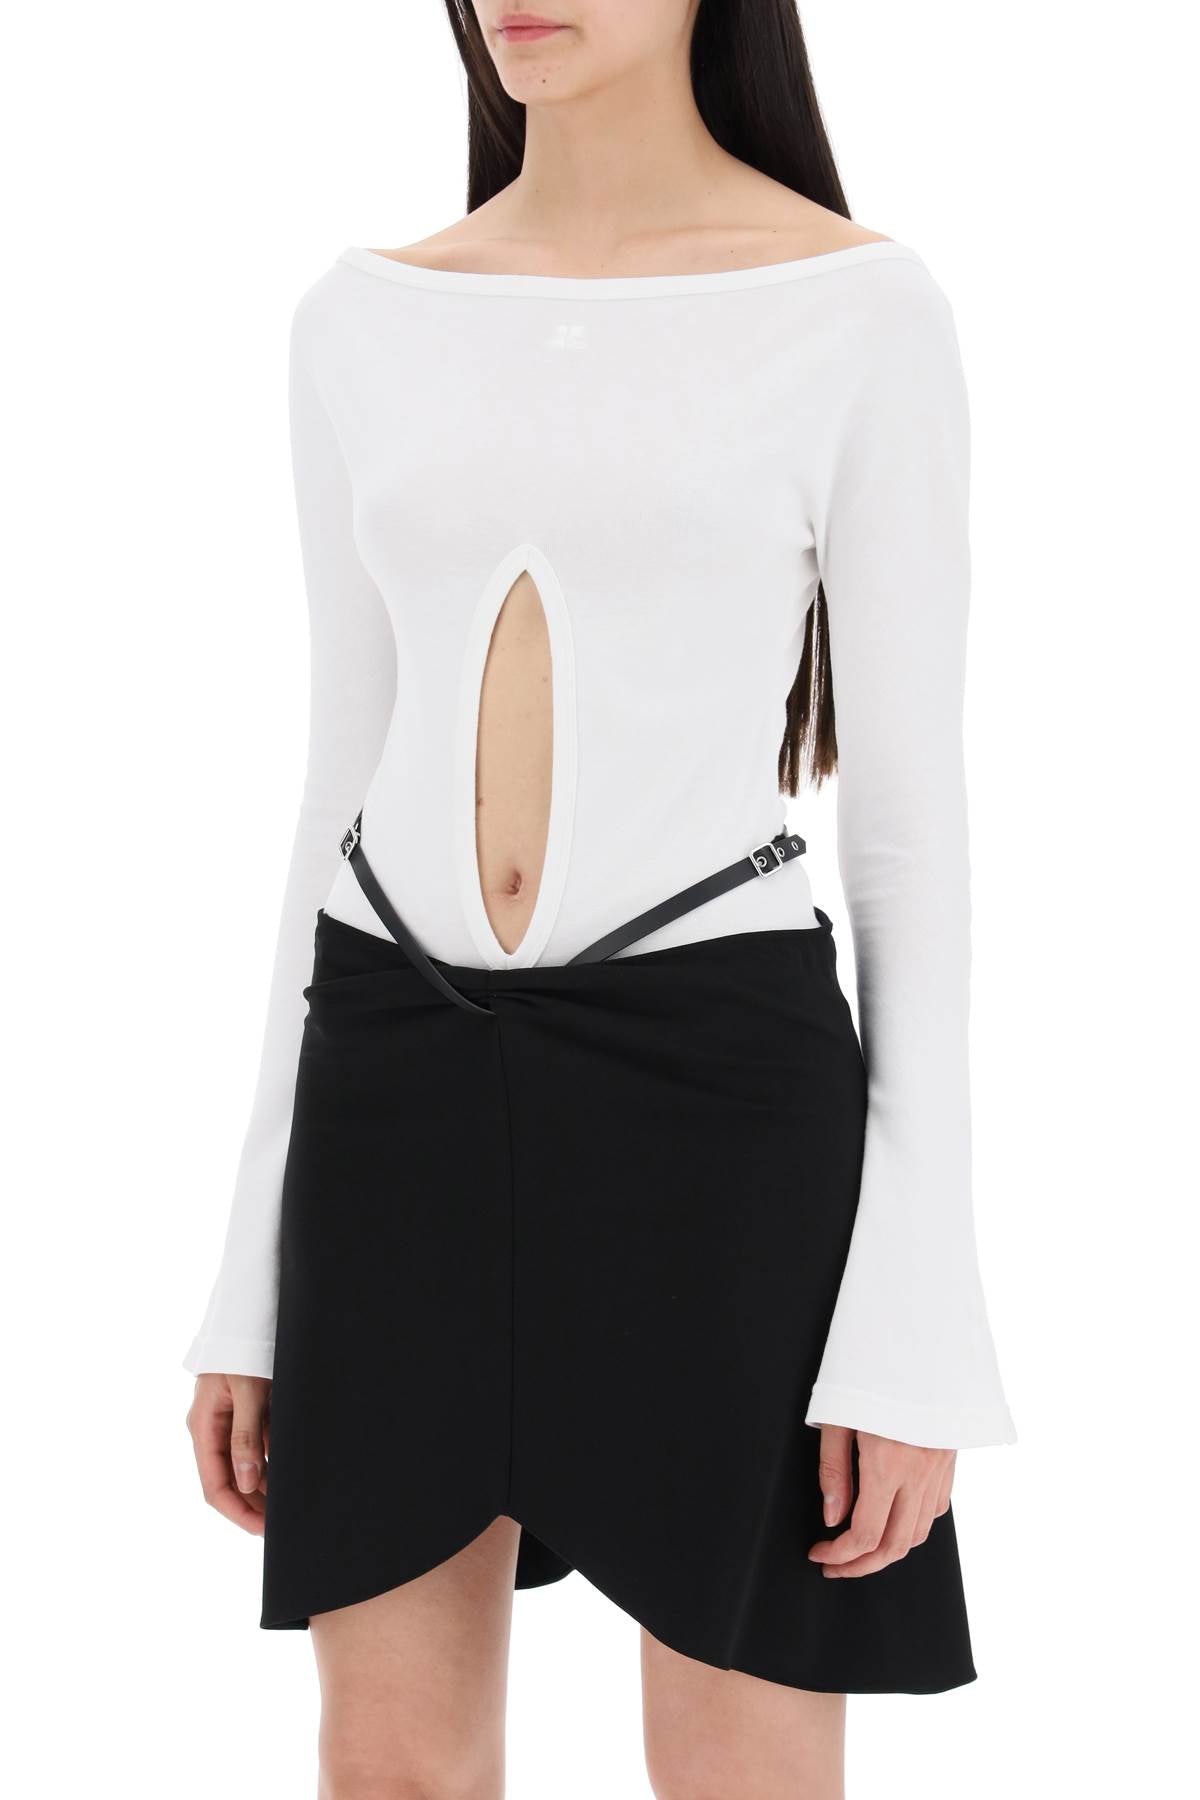 Courreges Replace With Double Quotejersey Body With Cut Out   White